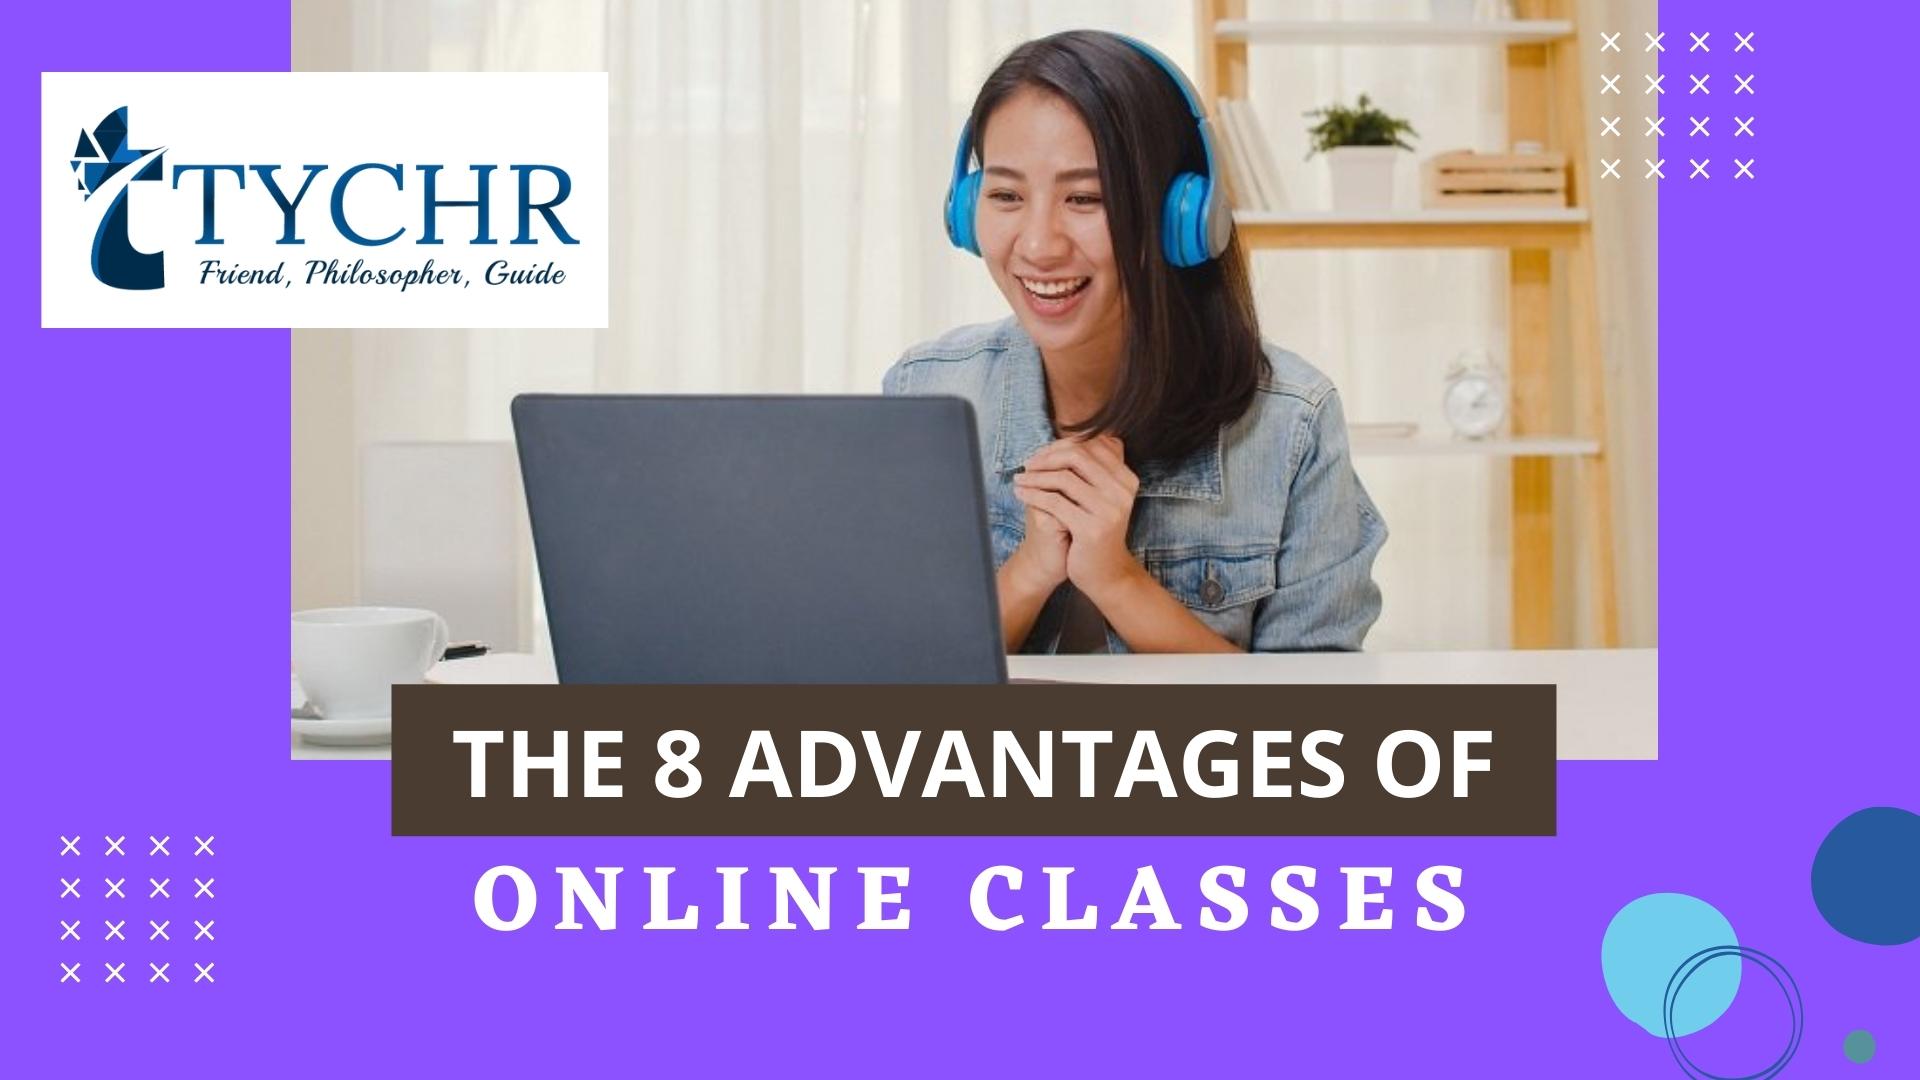 You are currently viewing The 8 Advantages of Online Classes